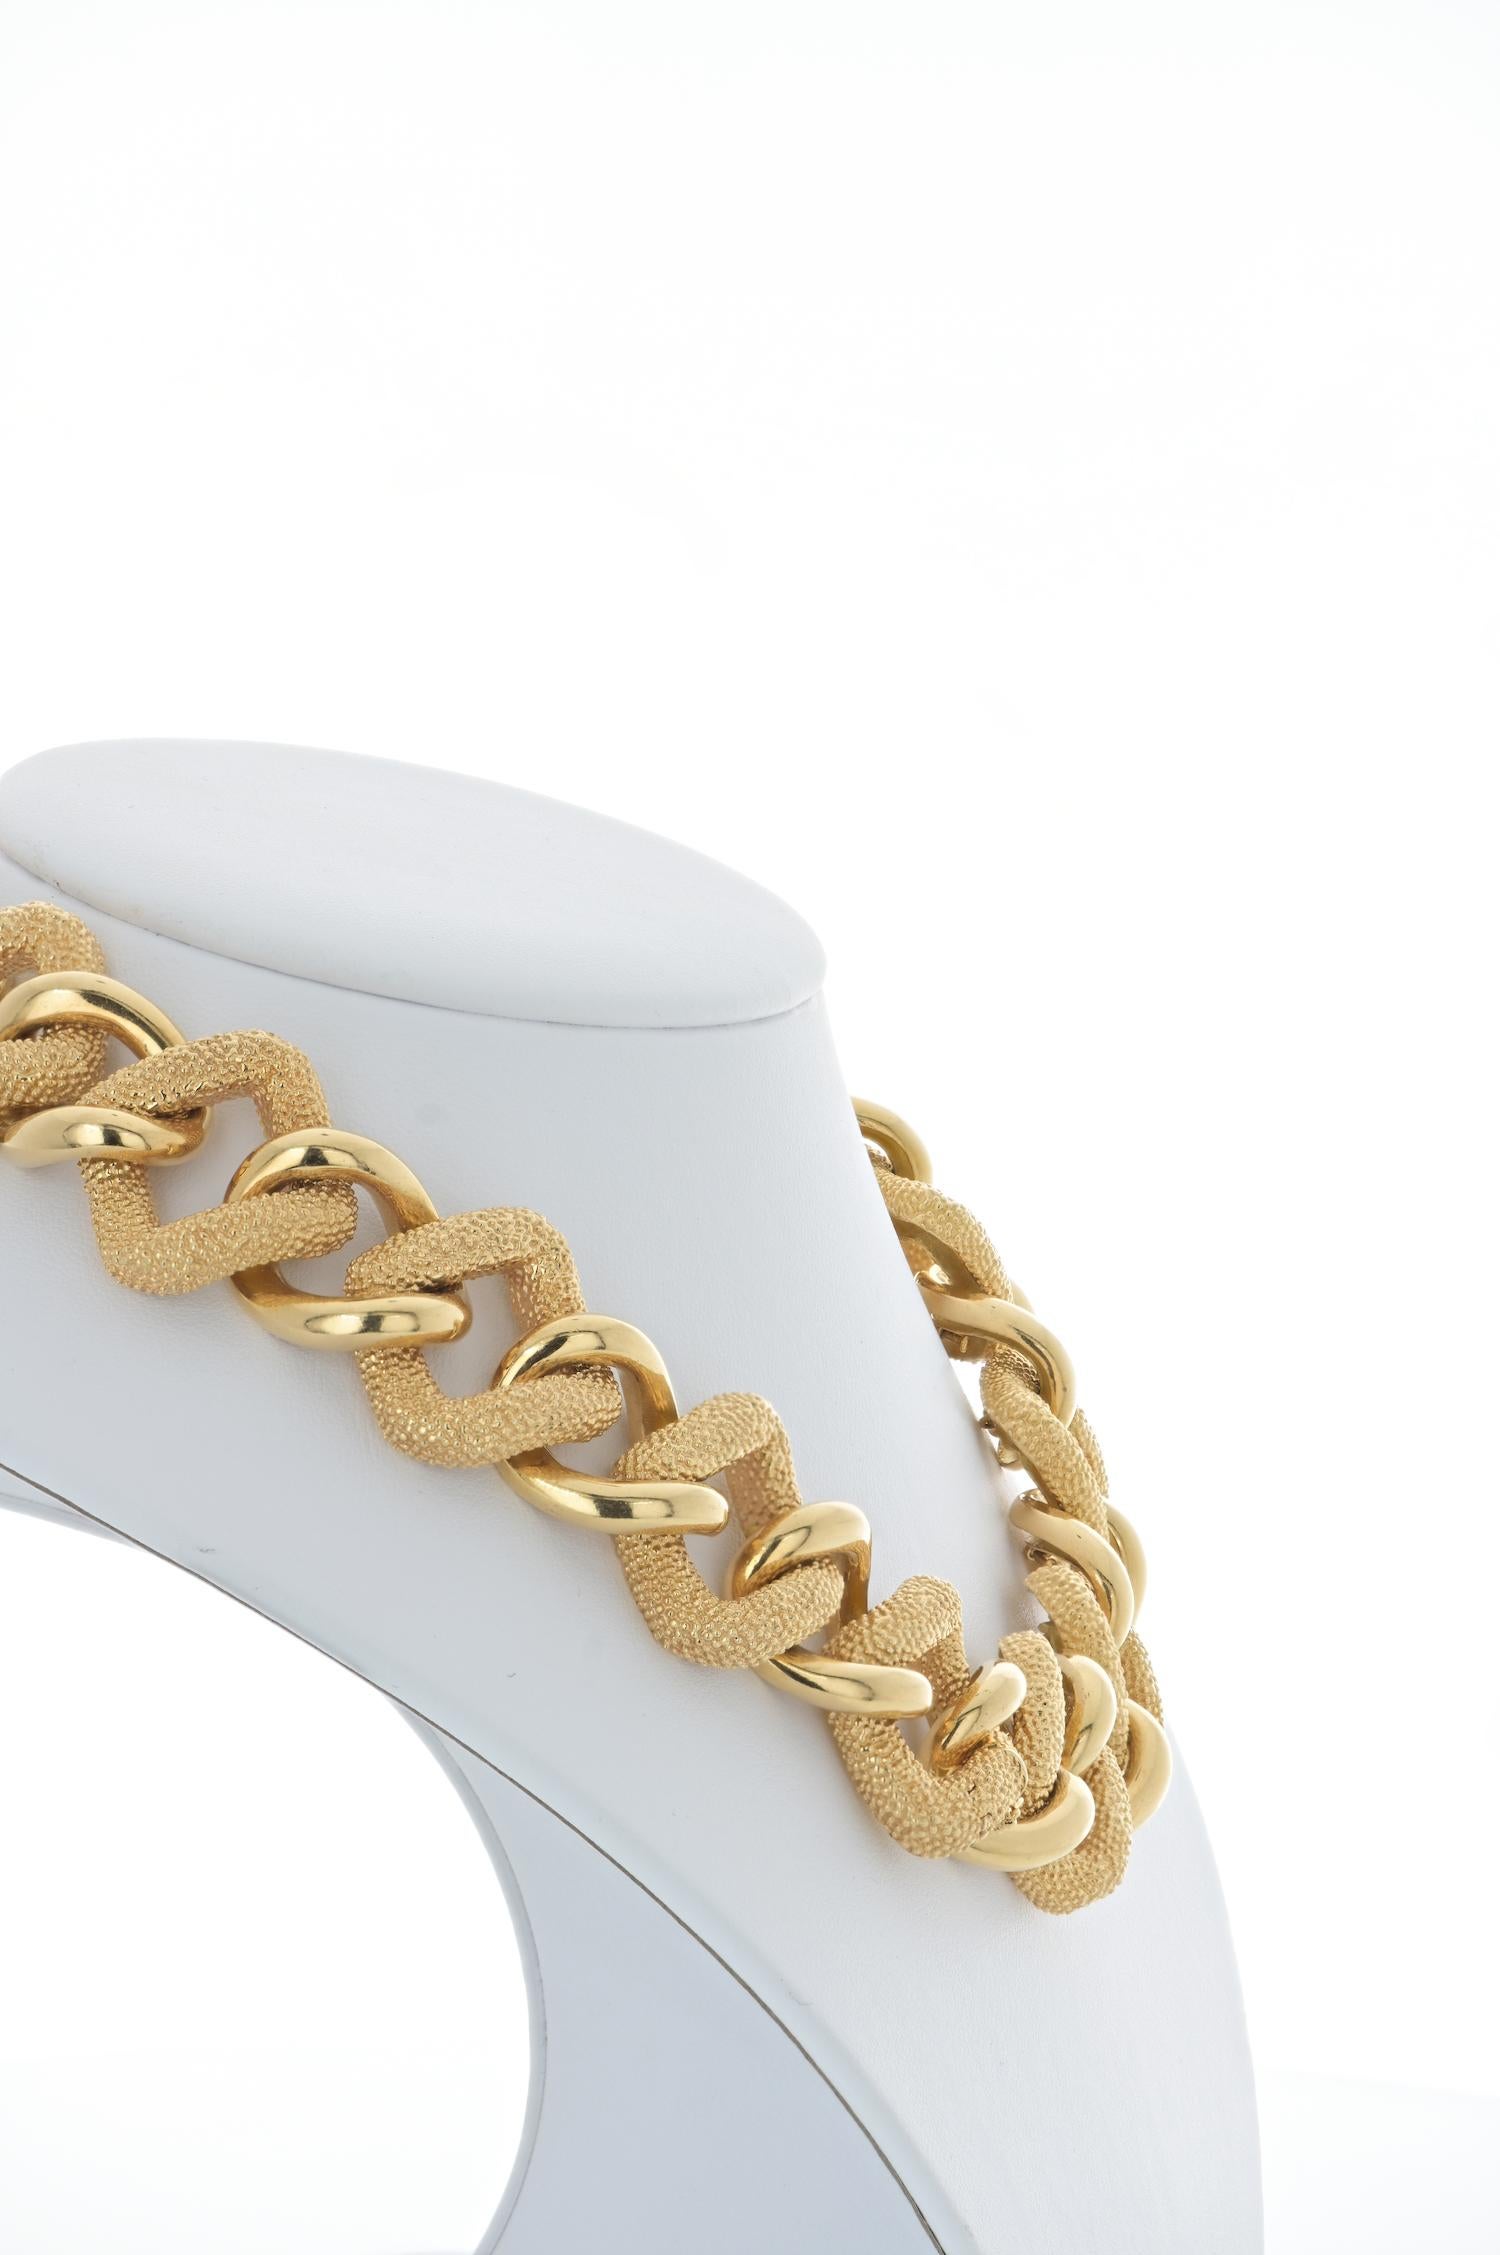 This is a chunky yellow gold chain by Van Cleef & Arpels crafted as a chain but can also be converted into two bracelets. The texture of the necklace is alternating: high polished vs sand-like finish that gives this necklace a bold dimension. 

L: